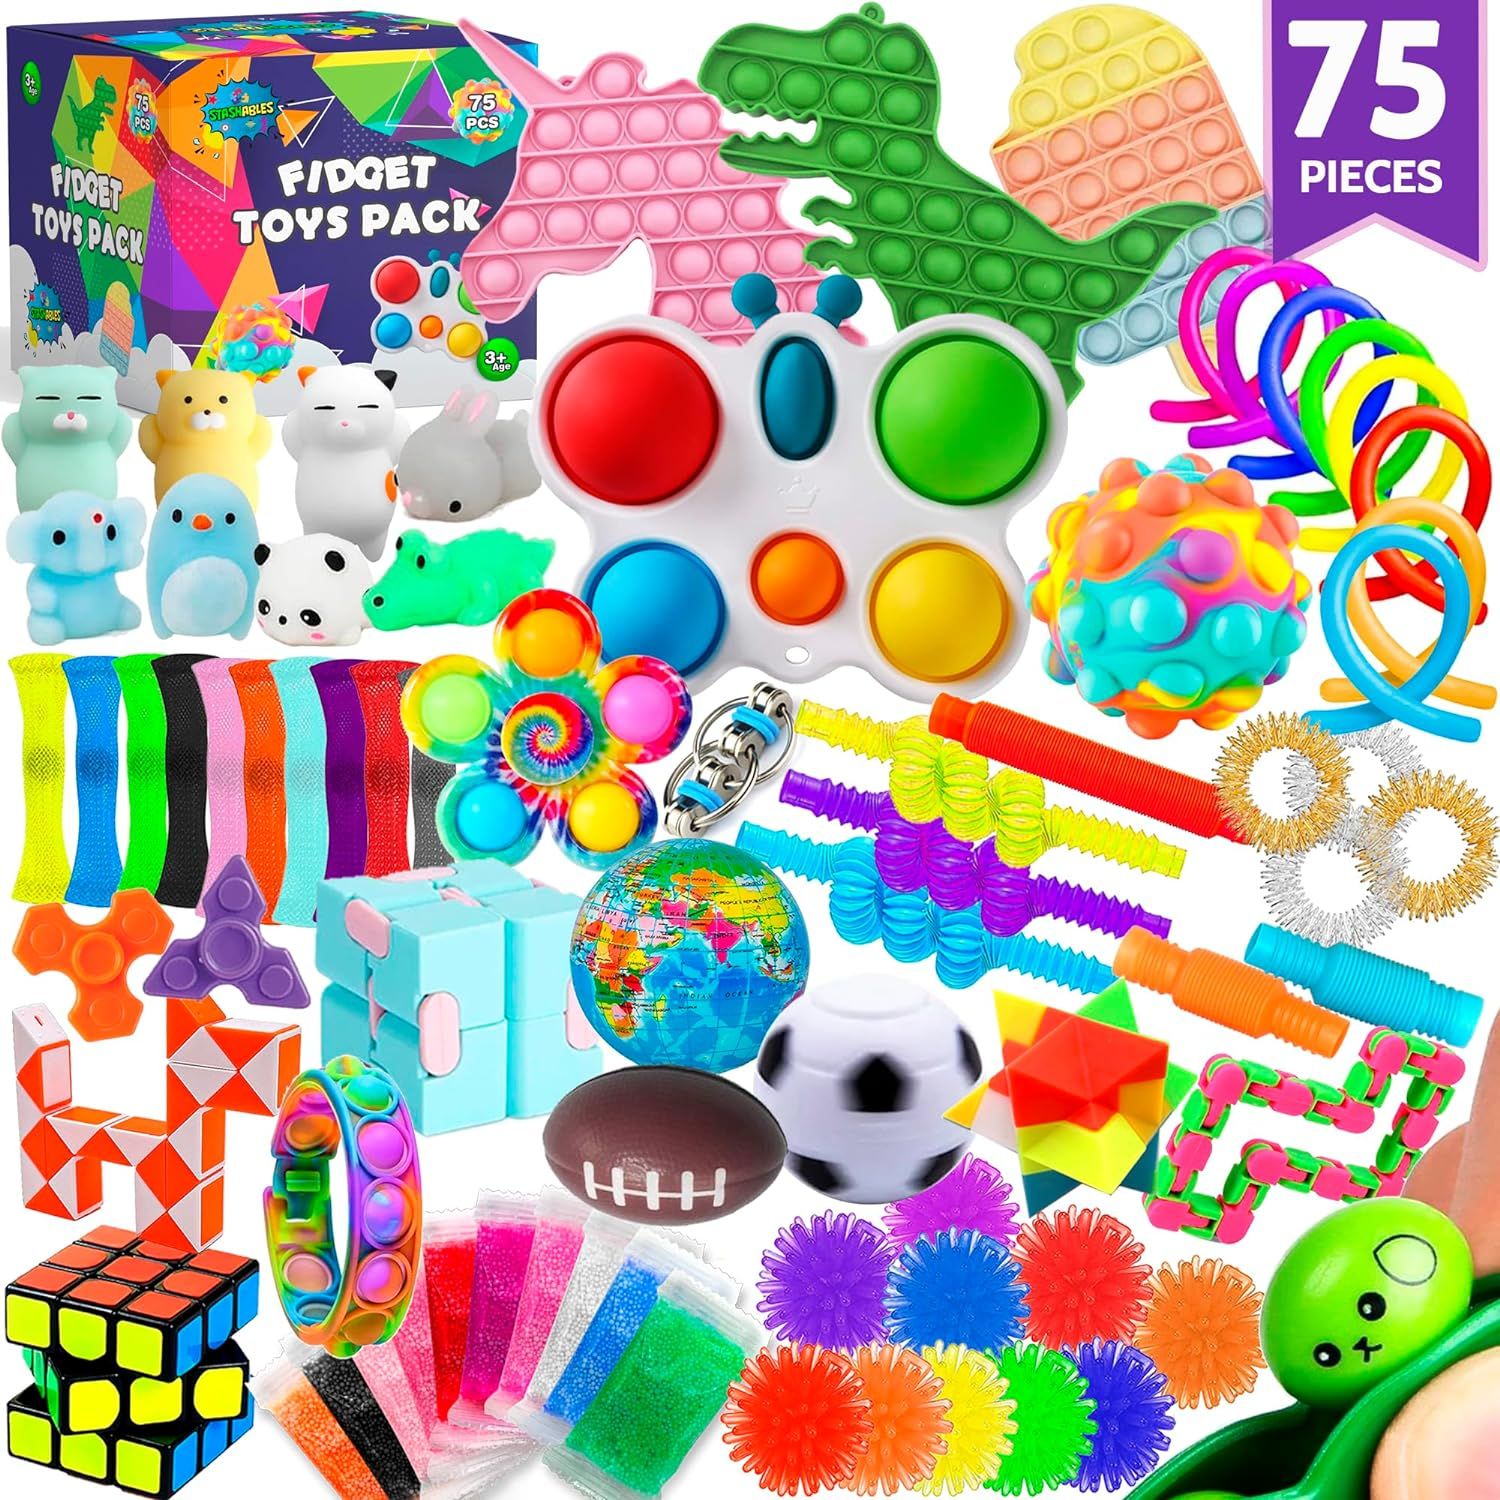 75 Pieces Fidget Toys for Kids - Party Favors Classroom Stress Relief Prizes - Treasure Chest, Goody Bag with Pop its for Autistic and ADHD - Bulk Fidget Box Gifts for Kids